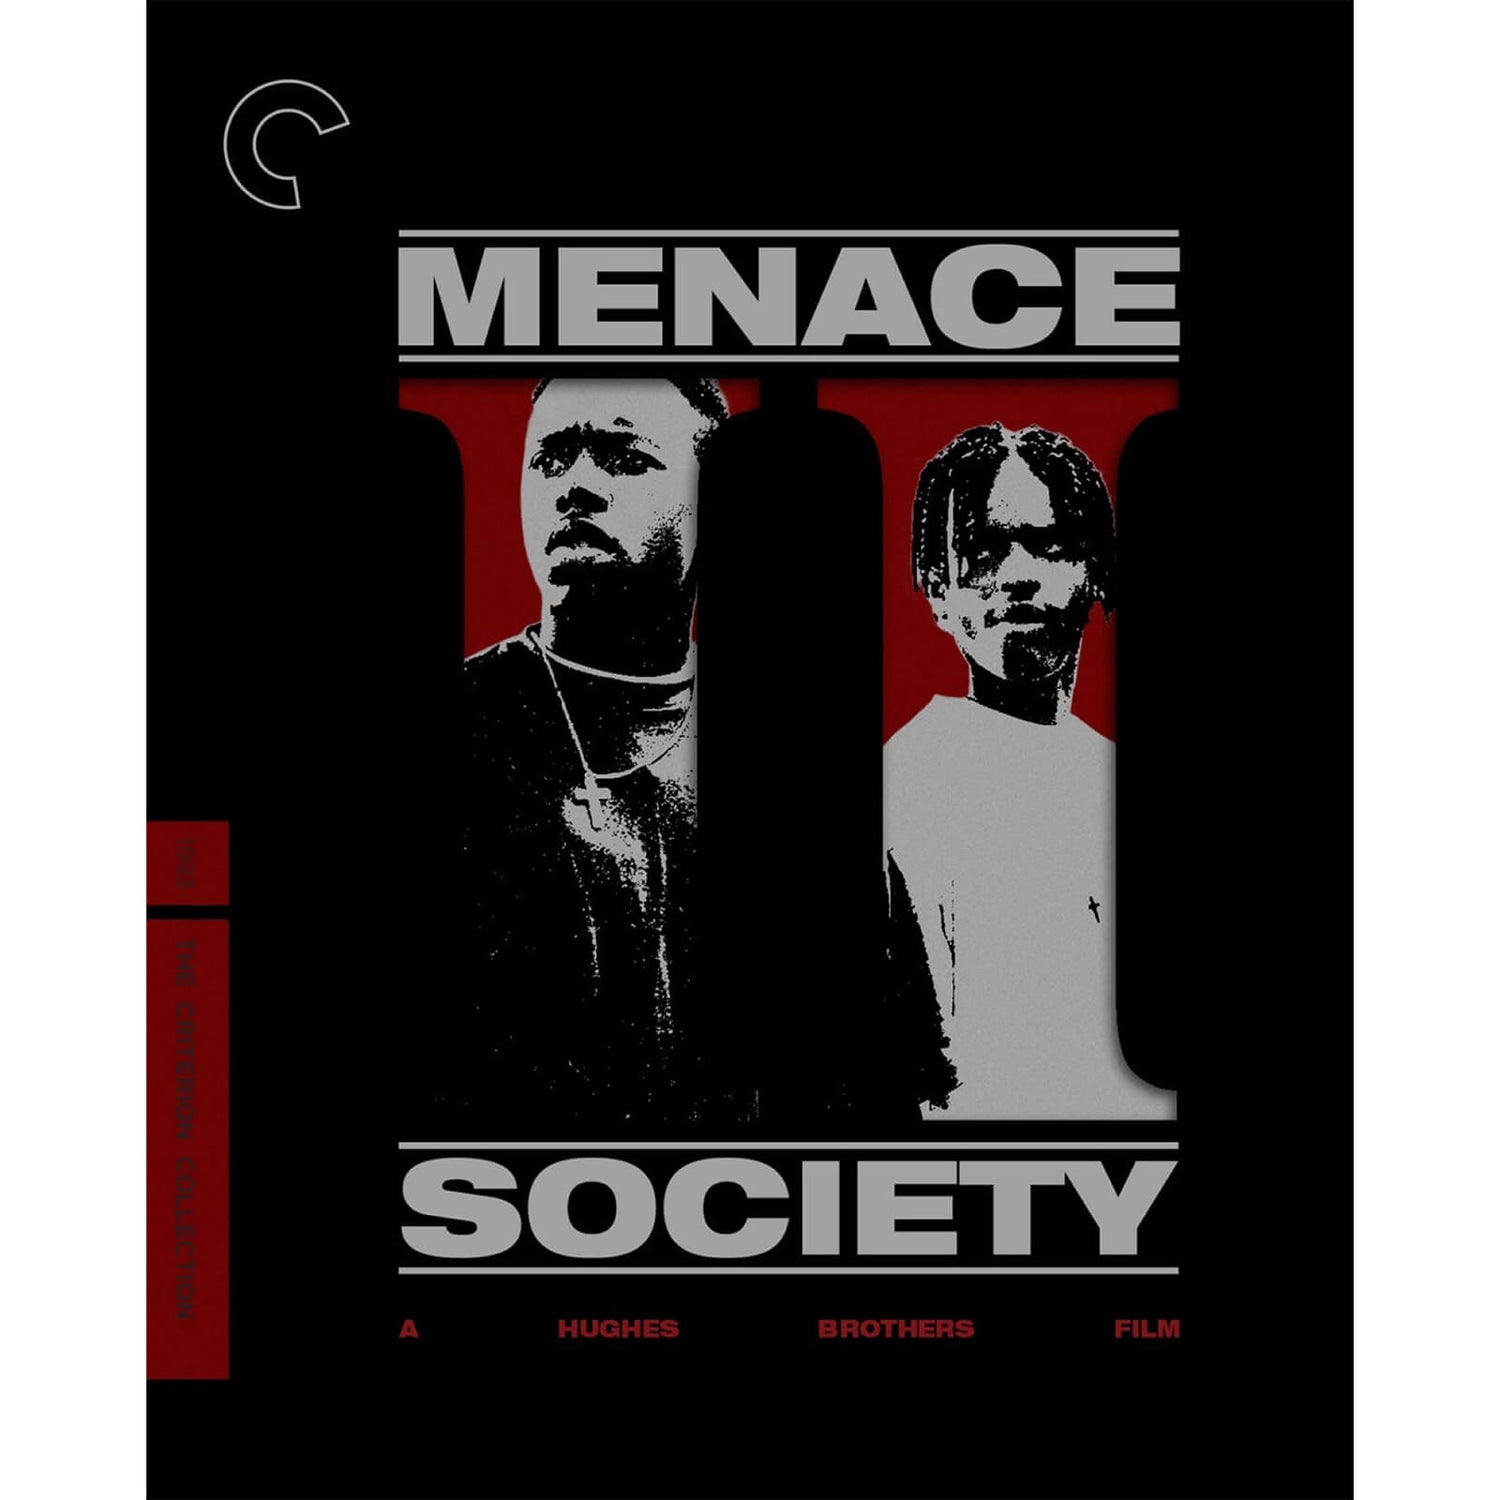 Menace II Society - The Criterion Collection 4K Ultra HD (Includes Blu-ray) (US Import)